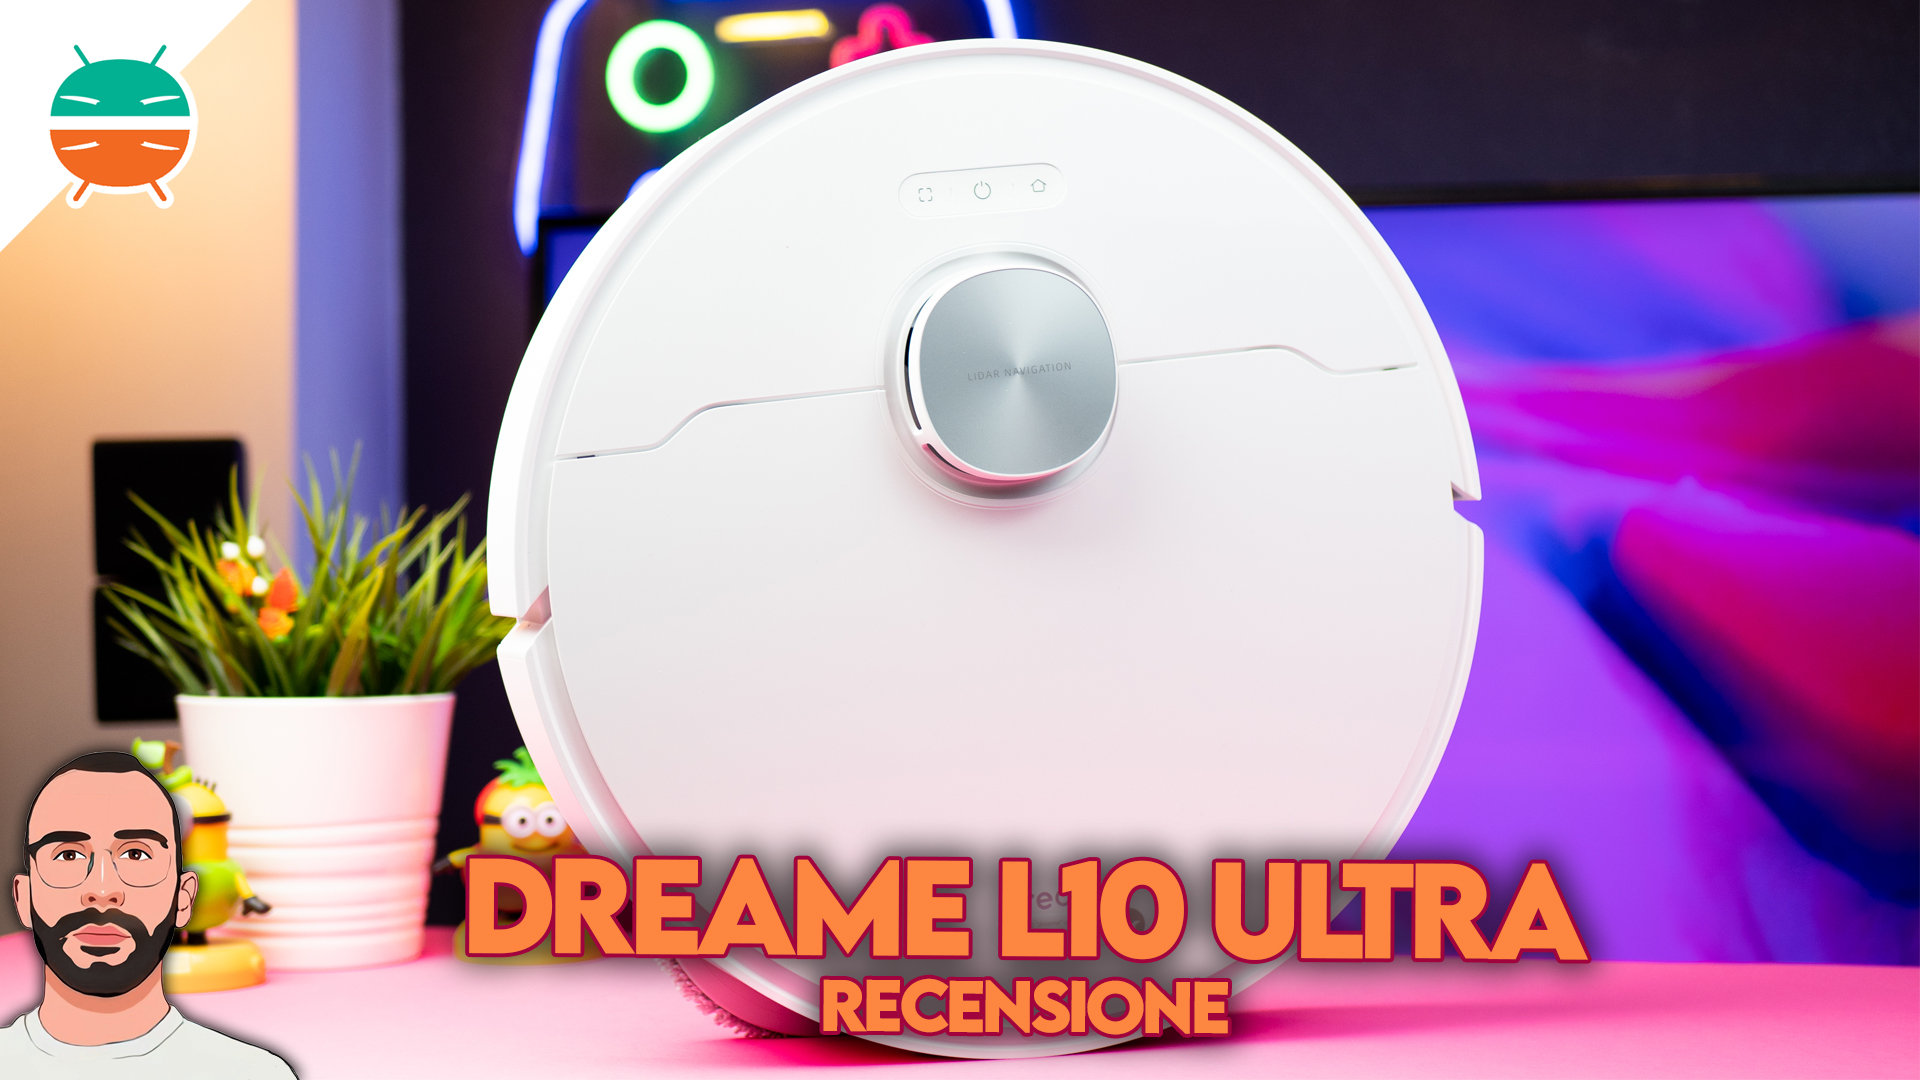 Dreame L10 Ultra review: it really DESTROYED the COMPETITION